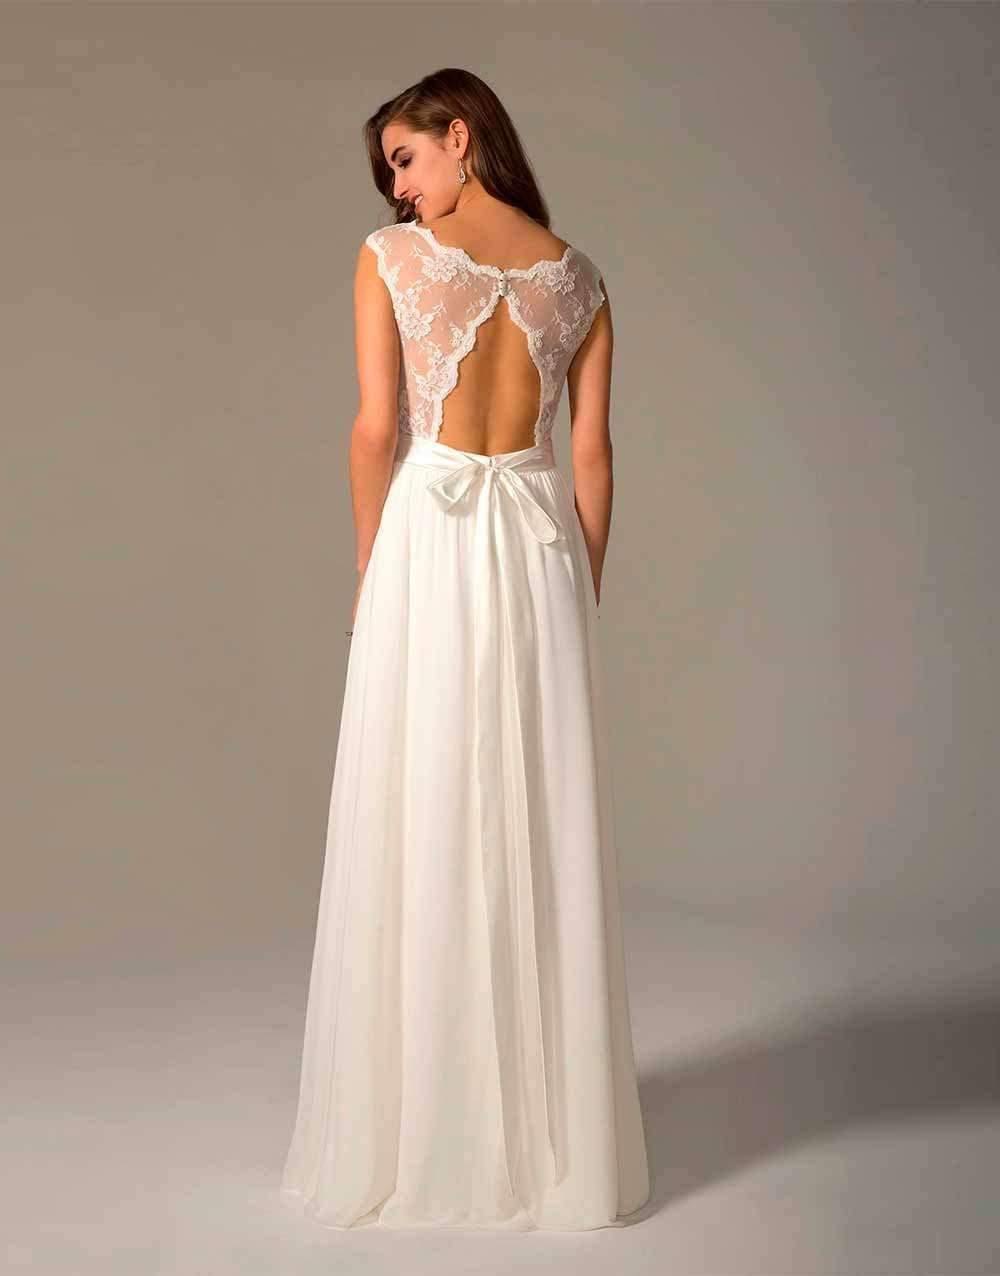 UK12 - Vanesia - SALE - Adore Bridal and Occasion Wear